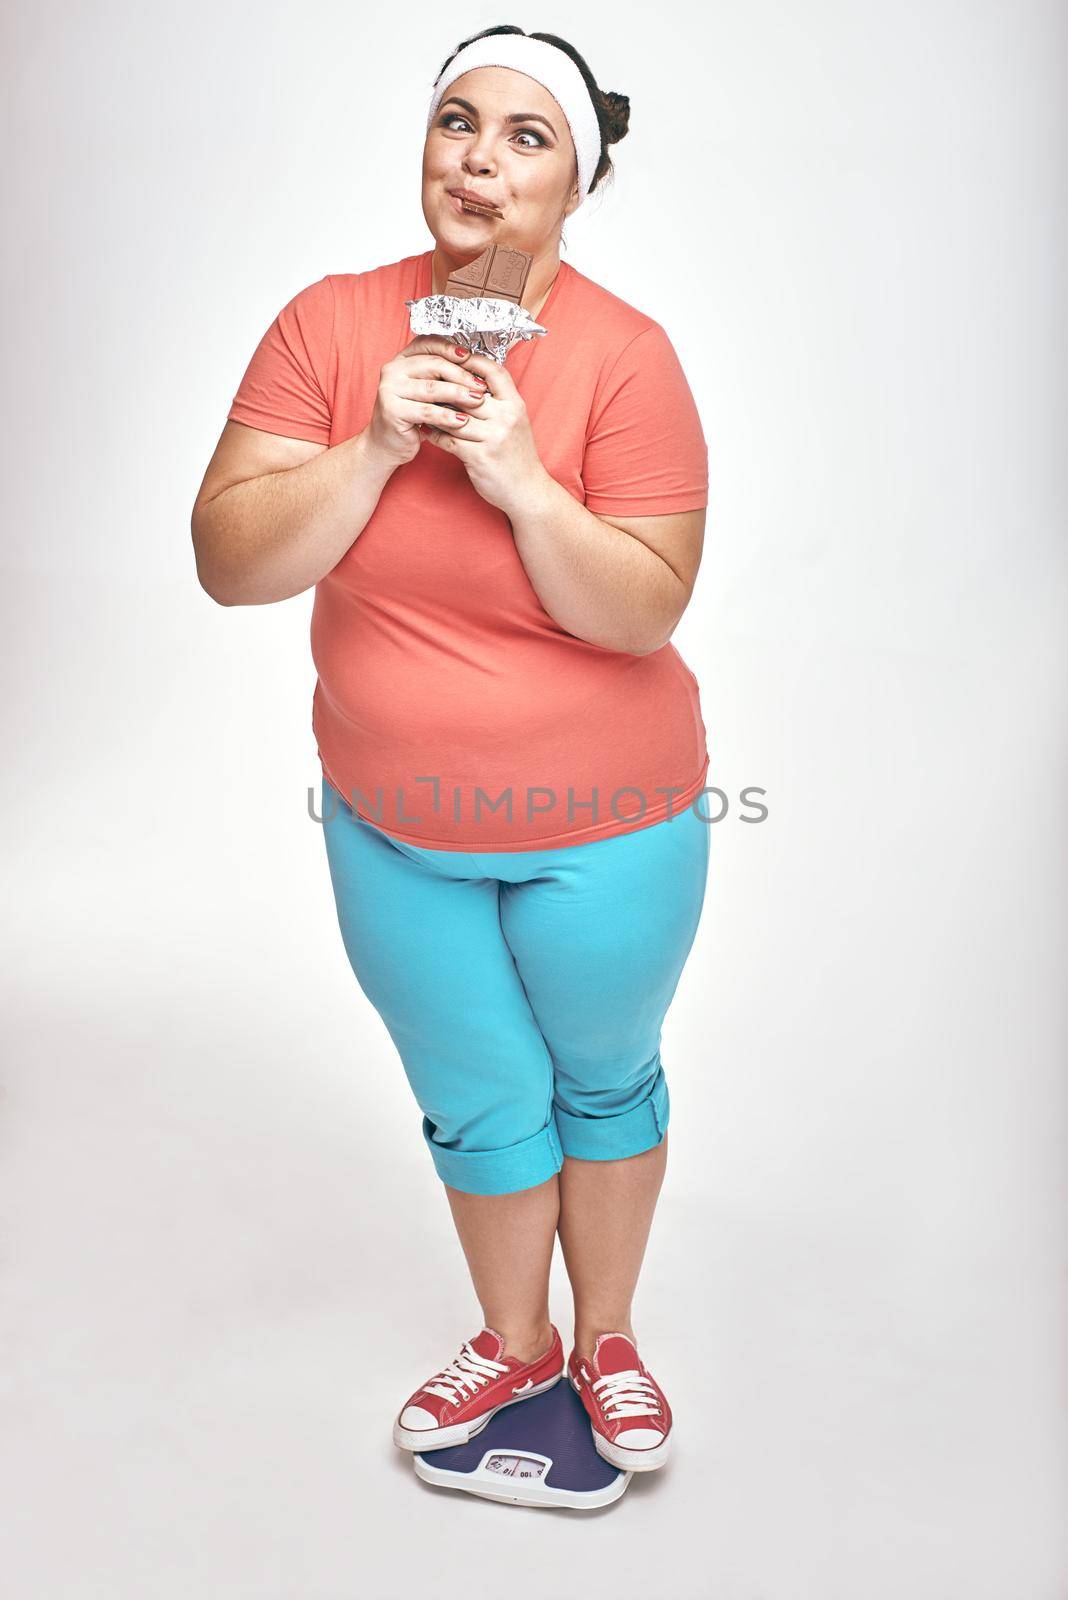 Funny picture of amusing, chubby woman on white background. She is eating chocolate while standing on the scales